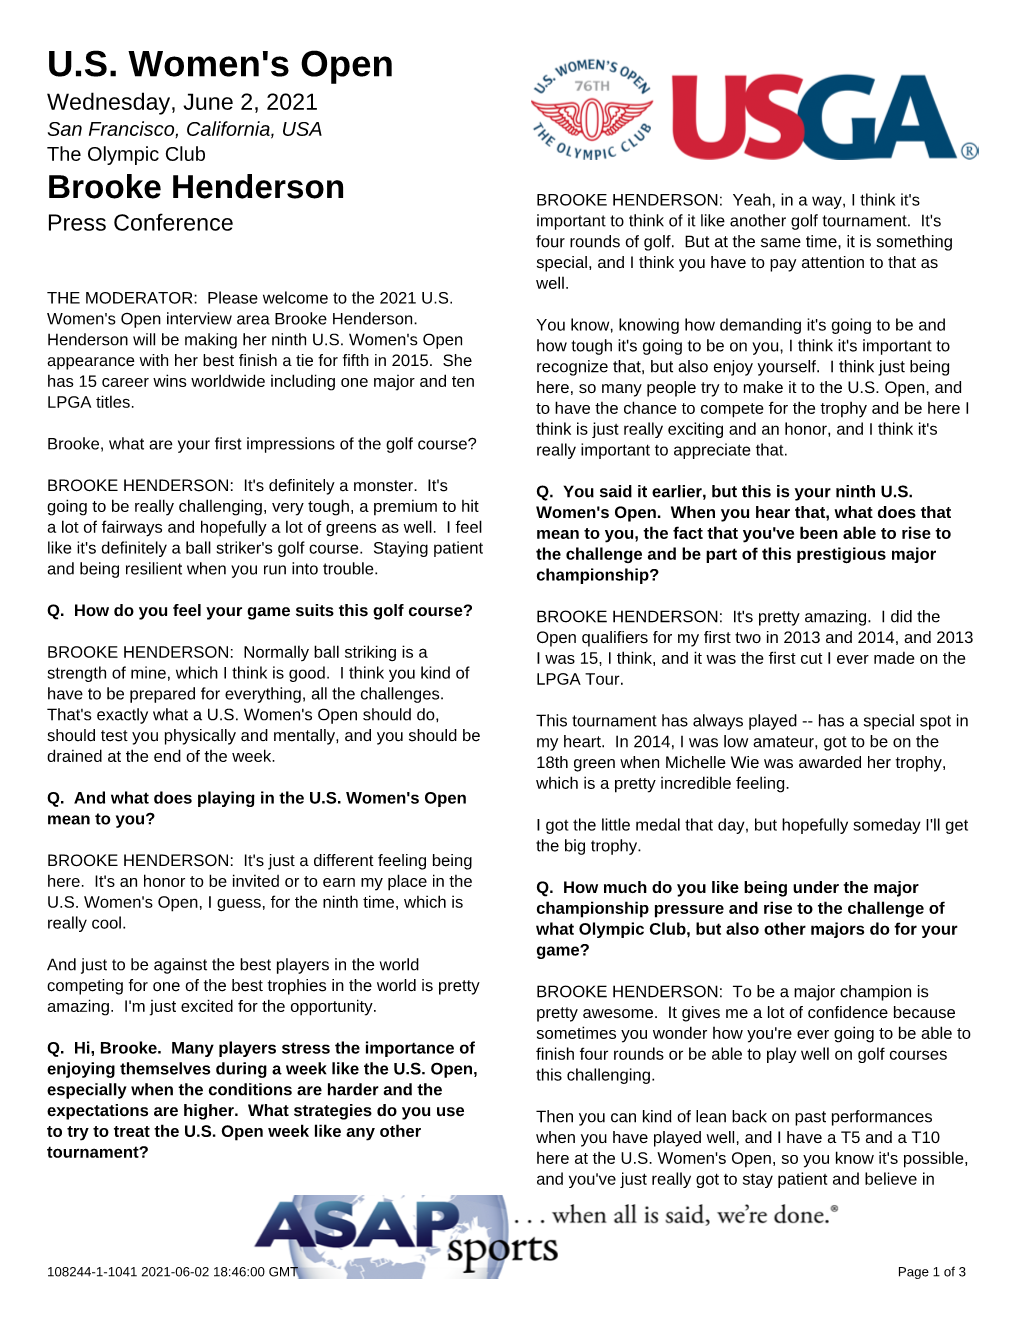 Brooke Henderson BROOKE HENDERSON: Yeah, in a Way, I Think It's Press Conference Important to Think of It Like Another Golf Tournament